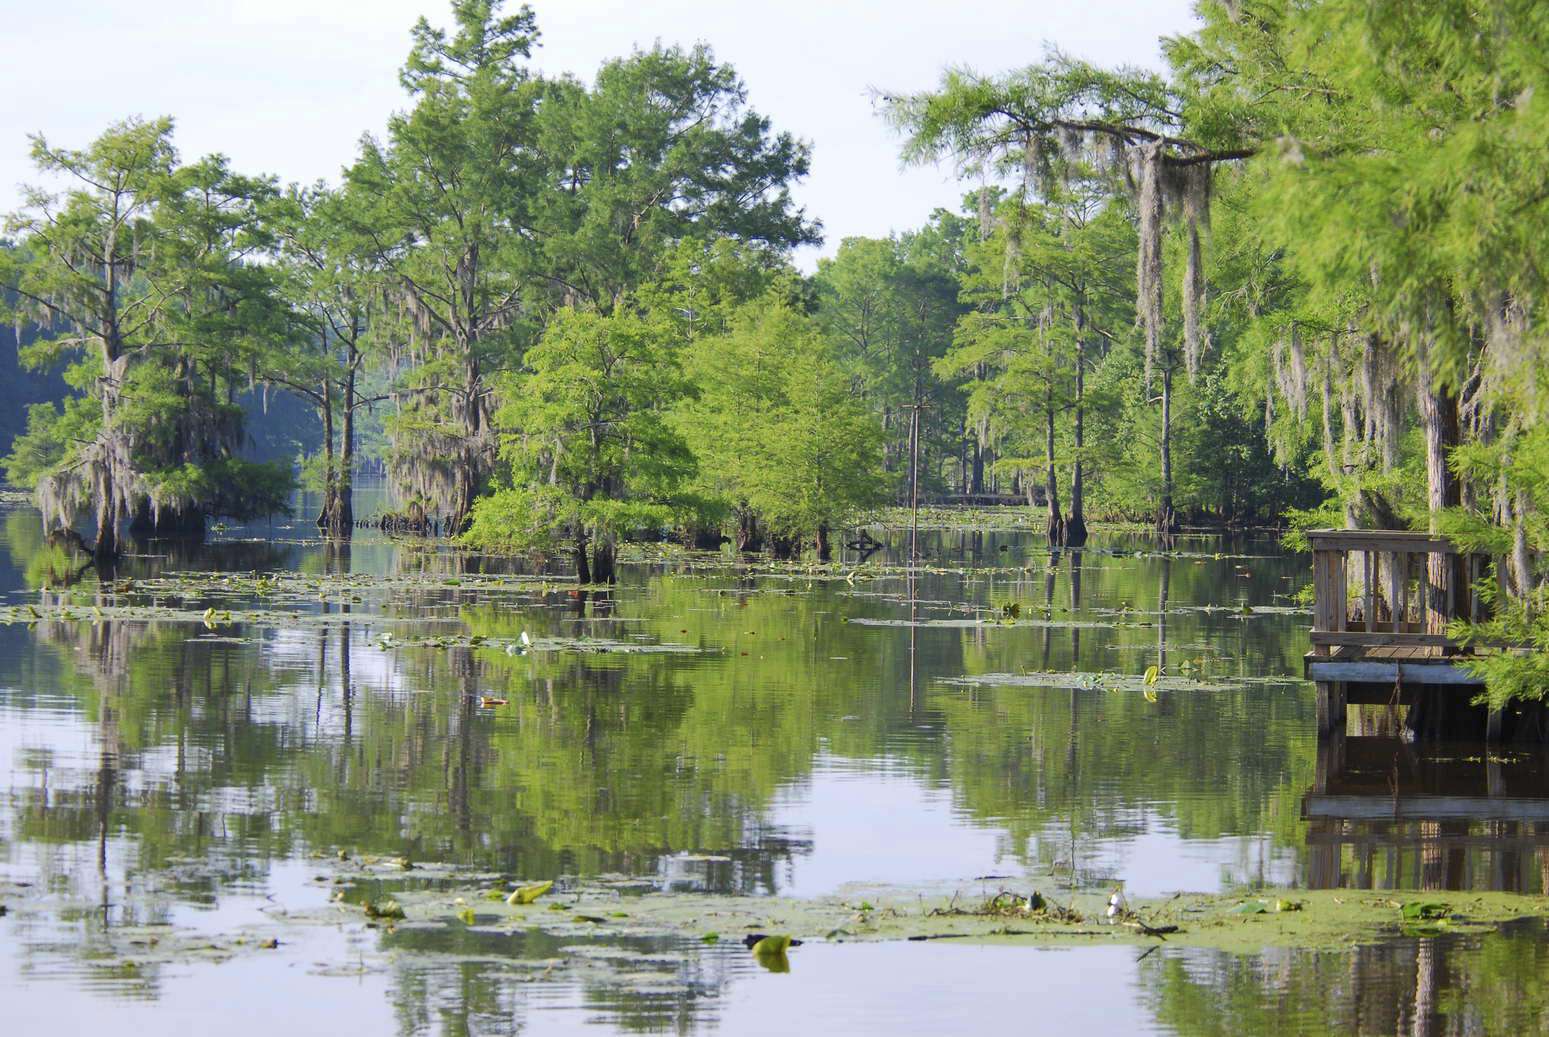 Caddo Lake is a 25,400-acre lake on the border of Texas and Louisiana.